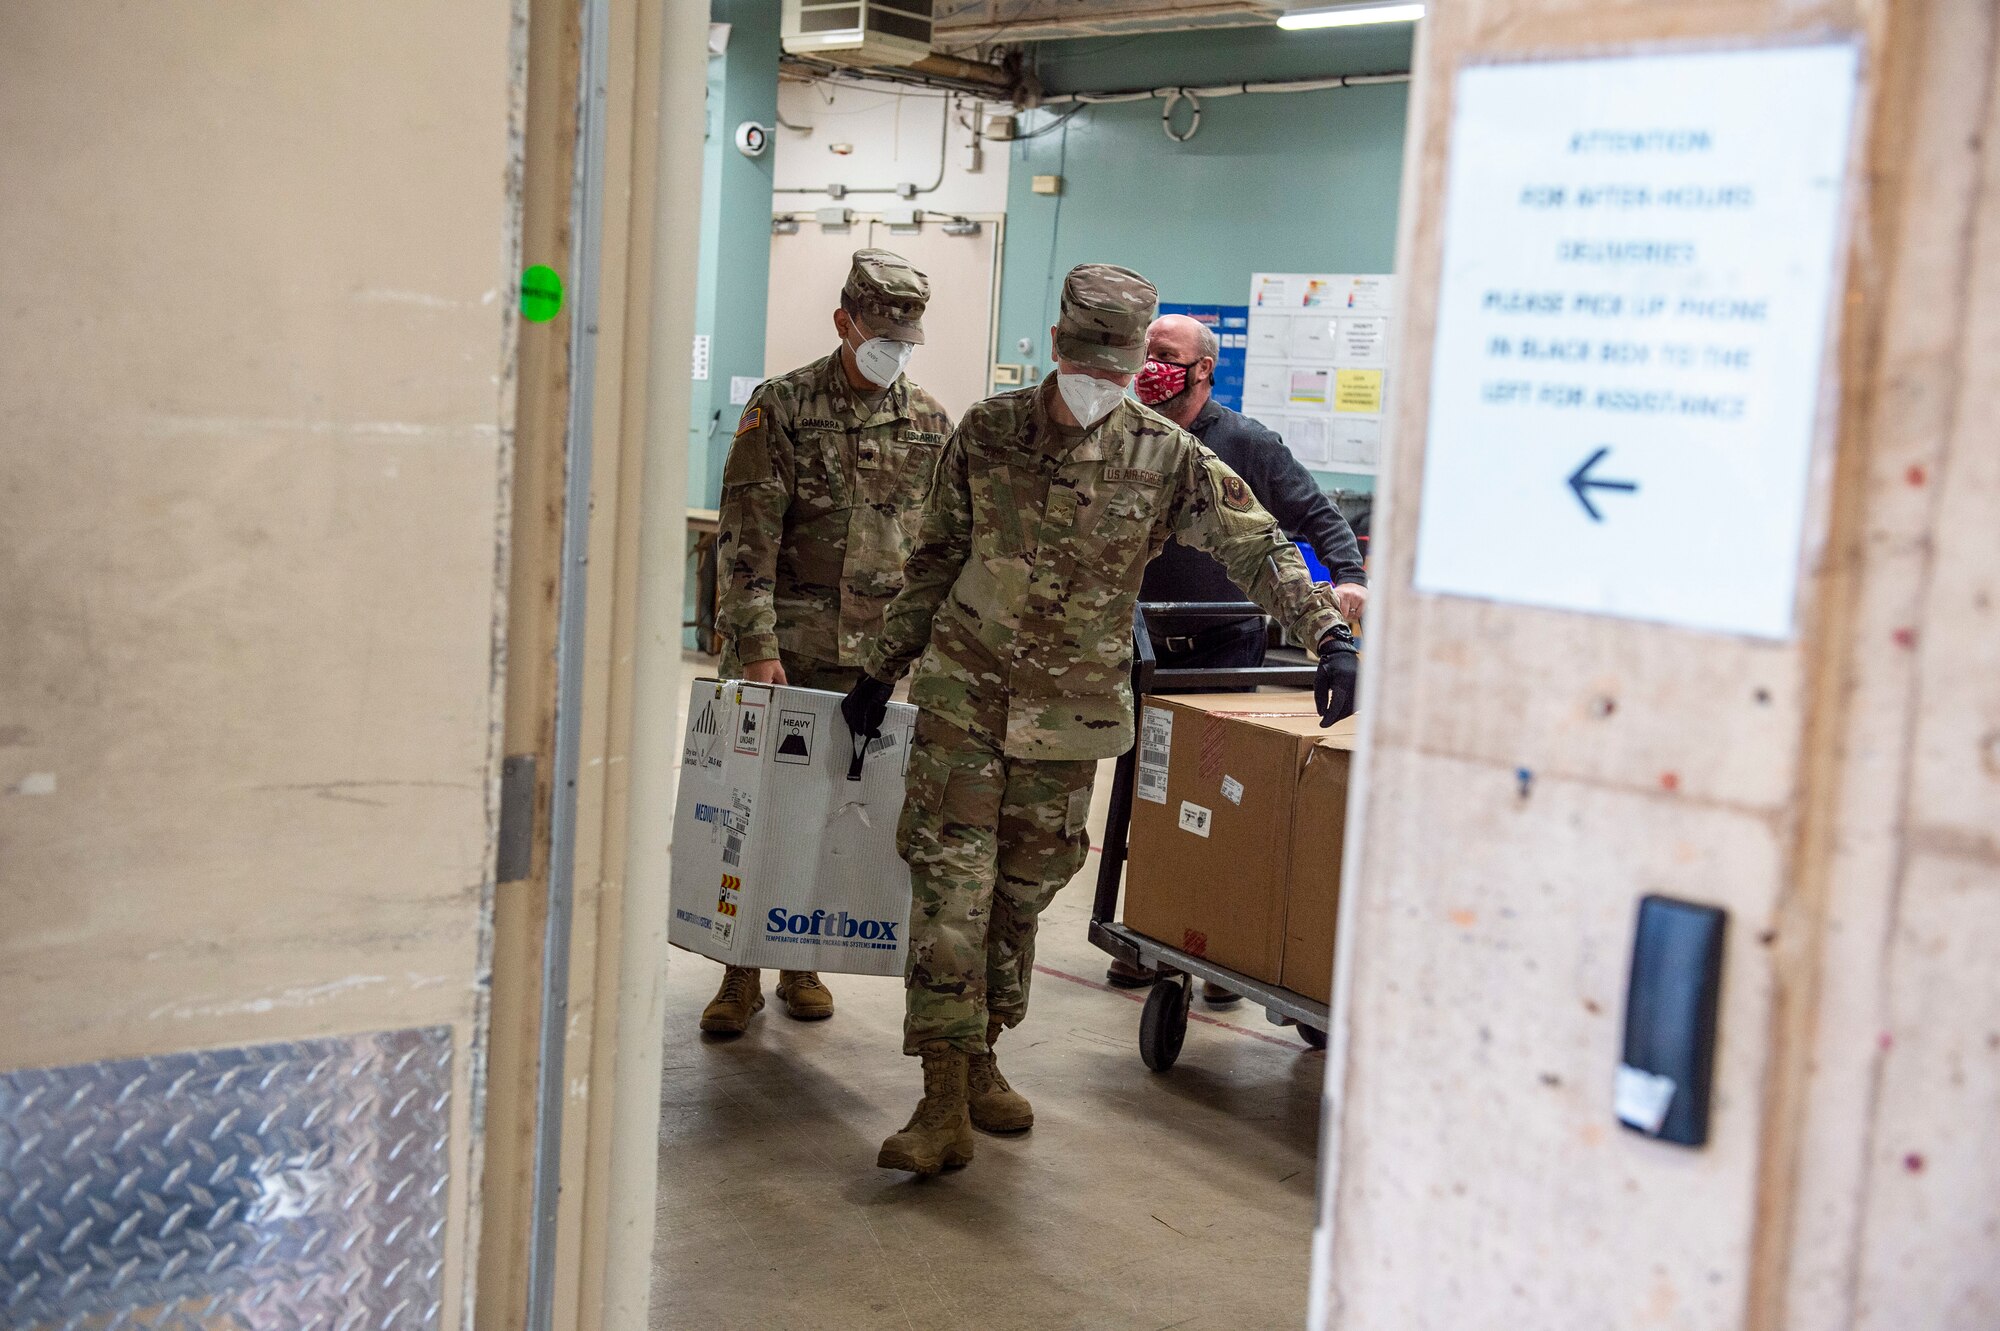 Spc. Martin Gamarra (left) and Airman 1st Class Andreas Owen (right) carry a box containing COVID-19 vaccinations after making their first delivery at a hospital in Oklahoma City, Dec. 15, 2020.

Gamarra and Owen are part of a larger team of Guardsmen who are delivering vaccines from from one of five centralized hubs supporting 11 satellite locations across Oklahoma. The Guardsmen will be using Oklahoma State Department of Health vehicles to transport the vaccines to the satellite locations with an escort from the Oklahoma Highway Patrol. (Oklahoma National Guard photo by Anthony Jones)